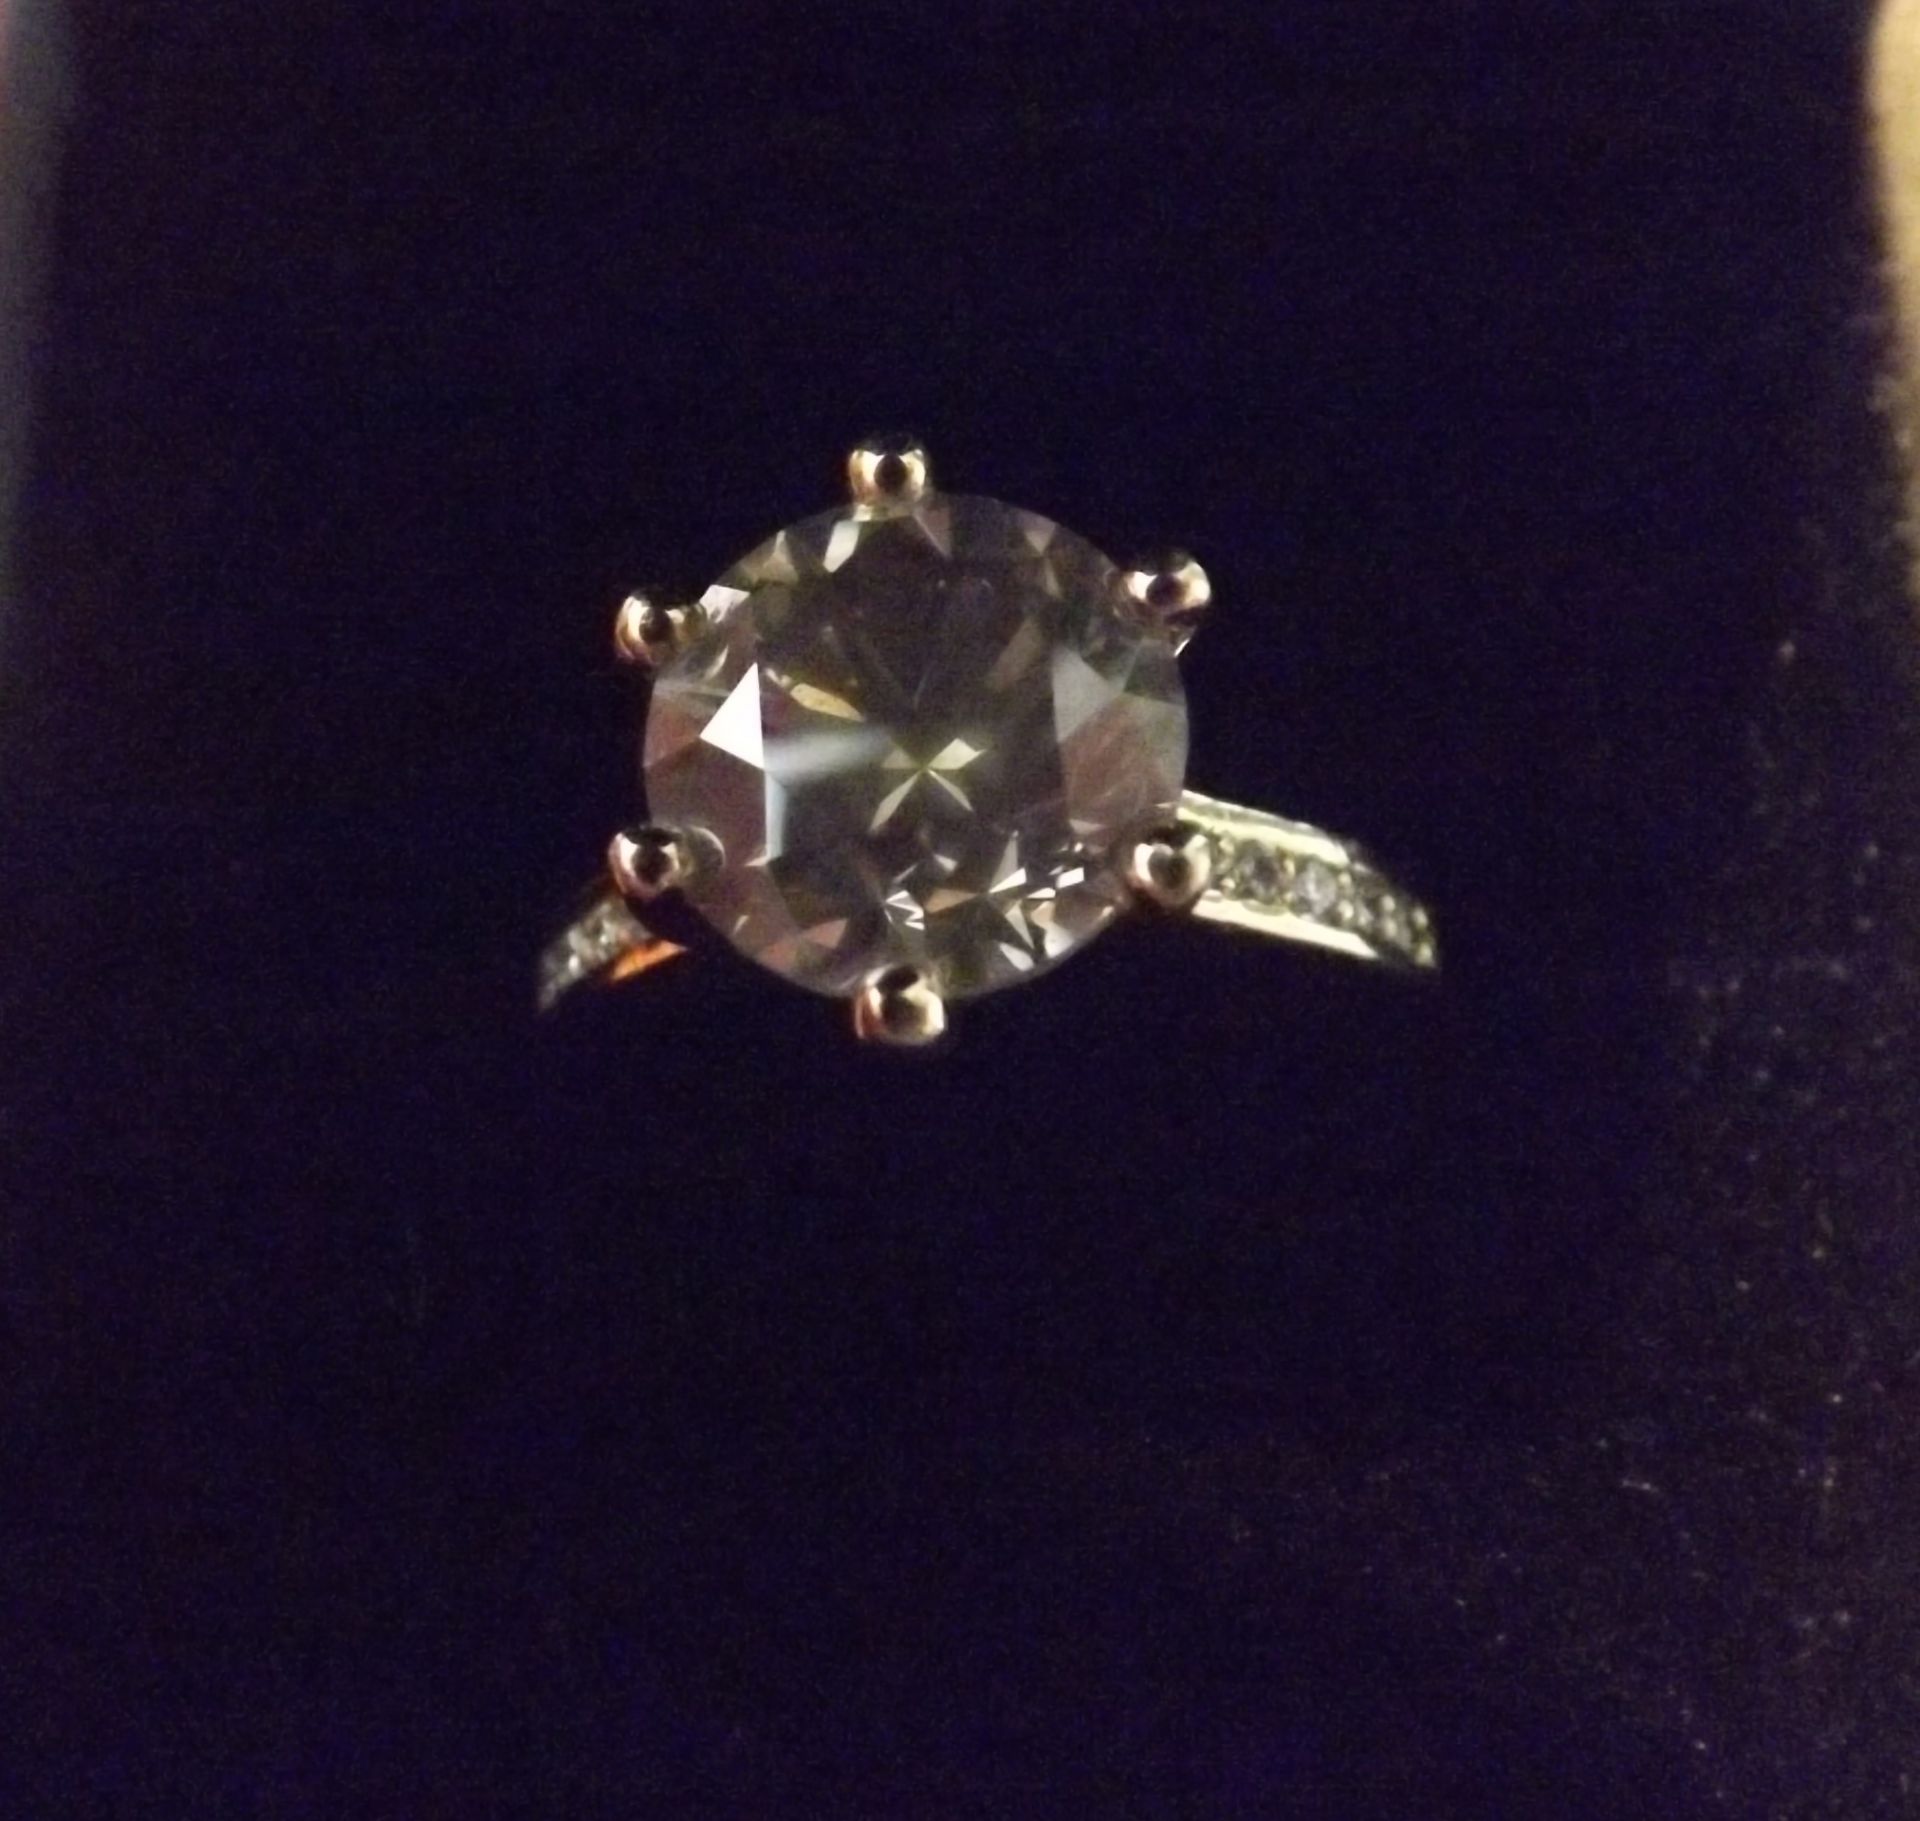 A 3.5 Carat Diamond Solitaire Ring, With a 3.0 carat single diamond, mounted in 18 carat gold, - Image 5 of 6